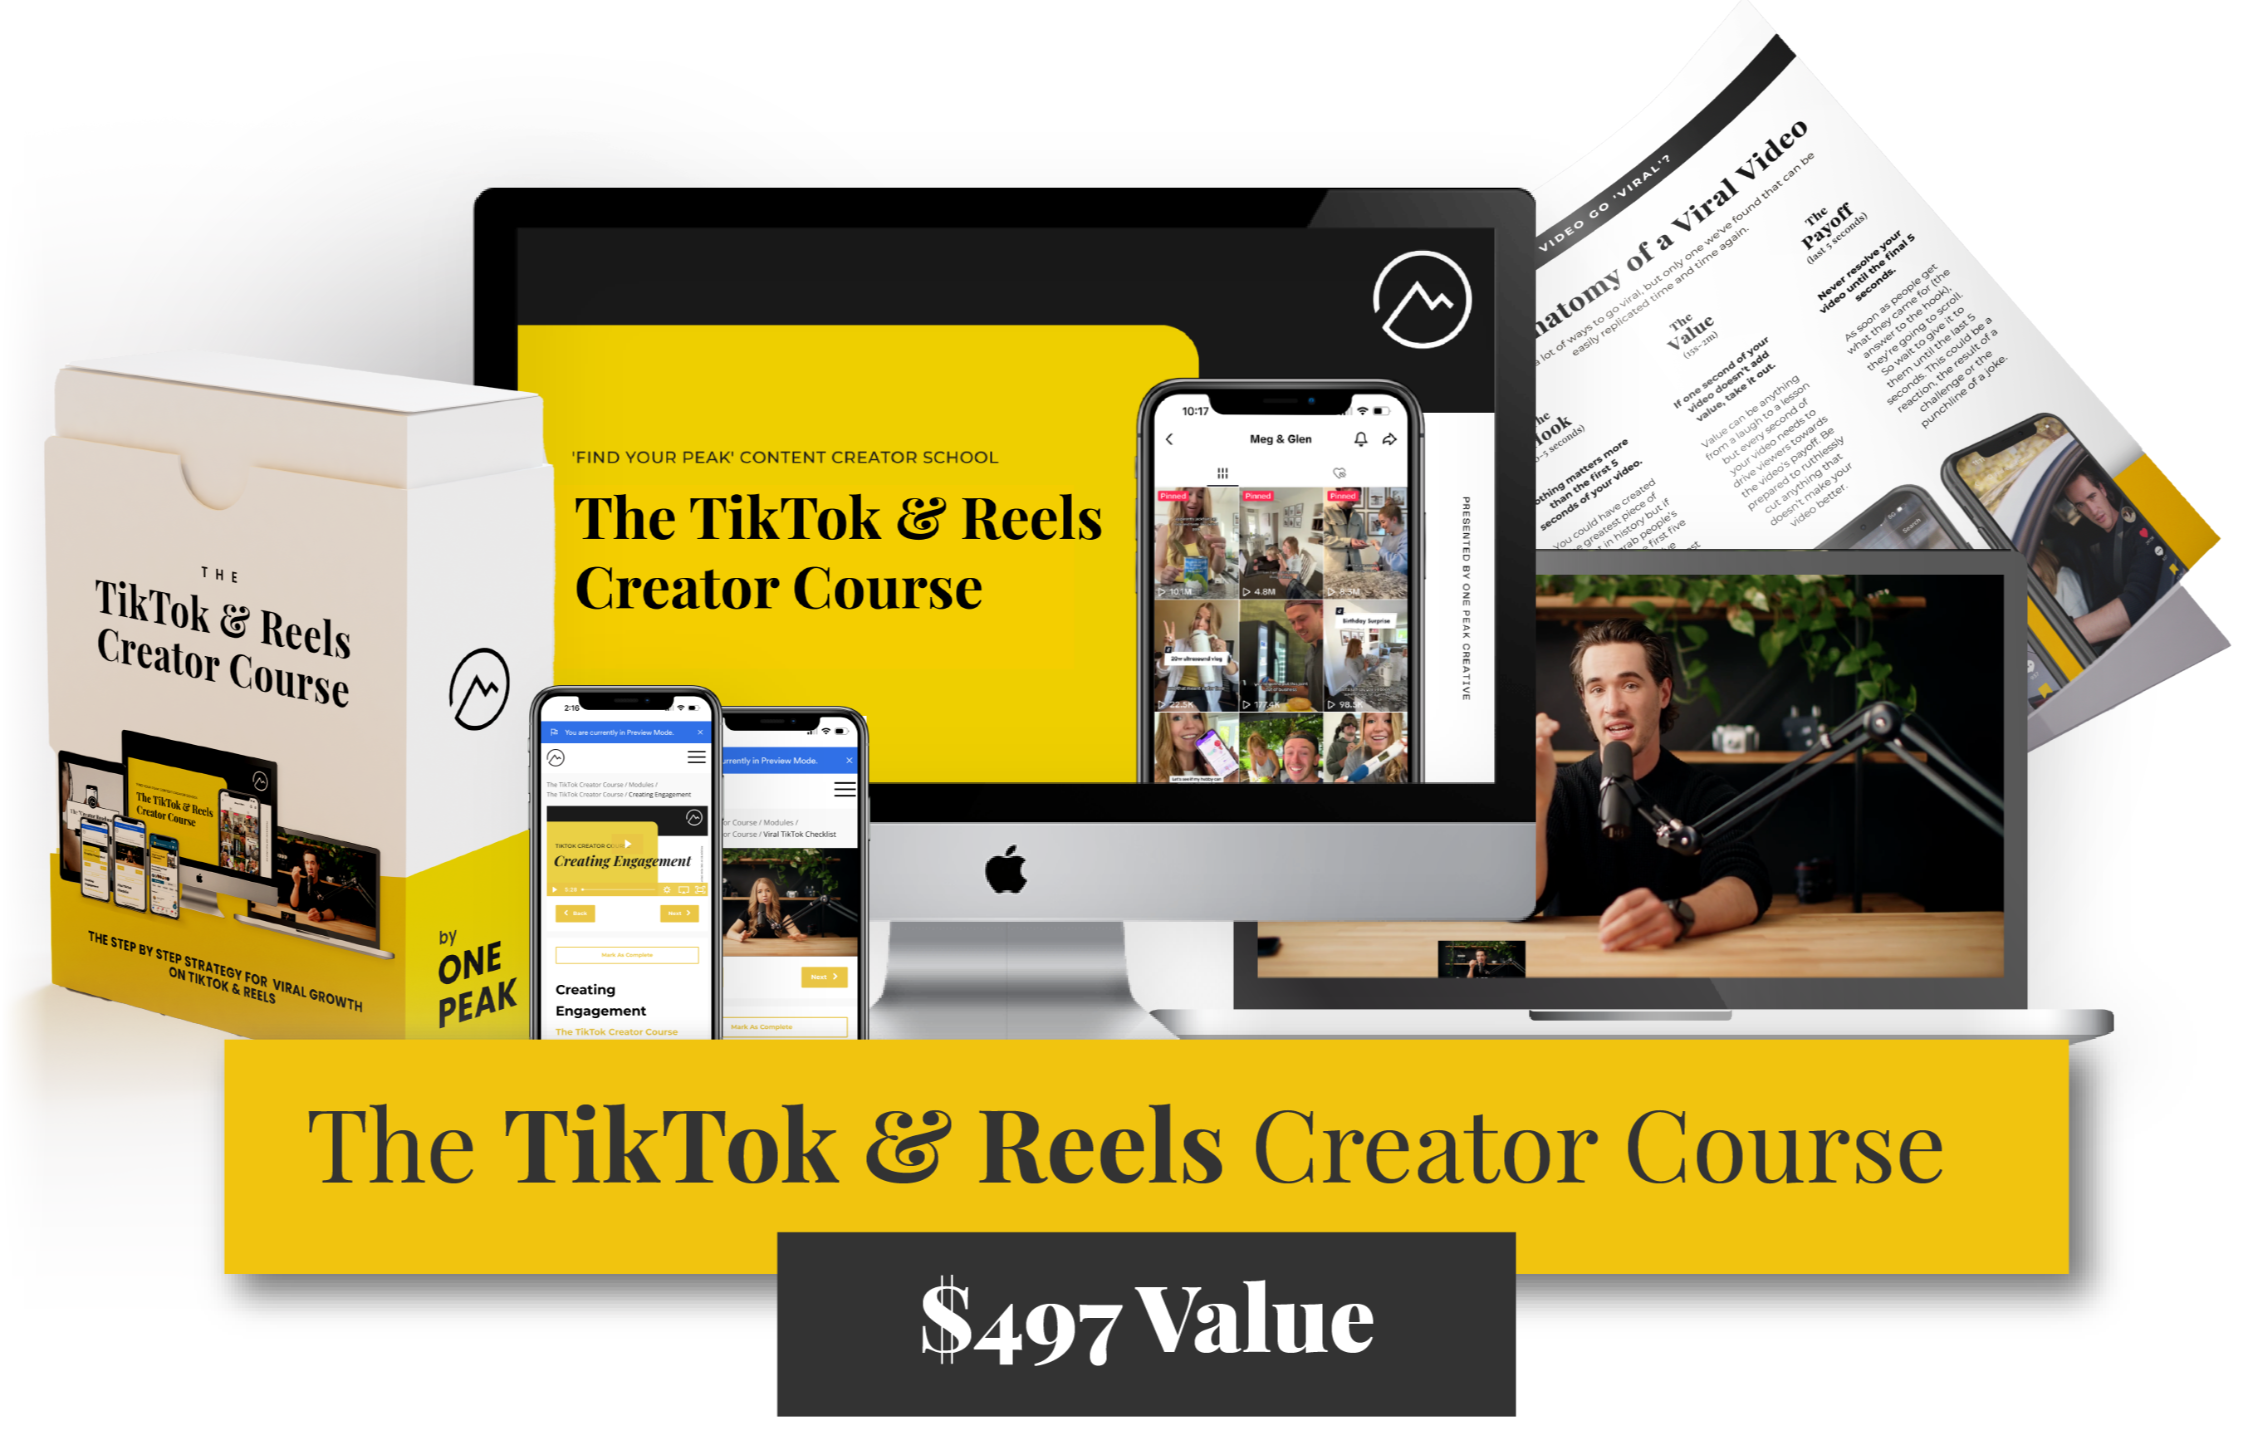 You are currently viewing One Peak Creative – The Tiktok & Reels Creator Course